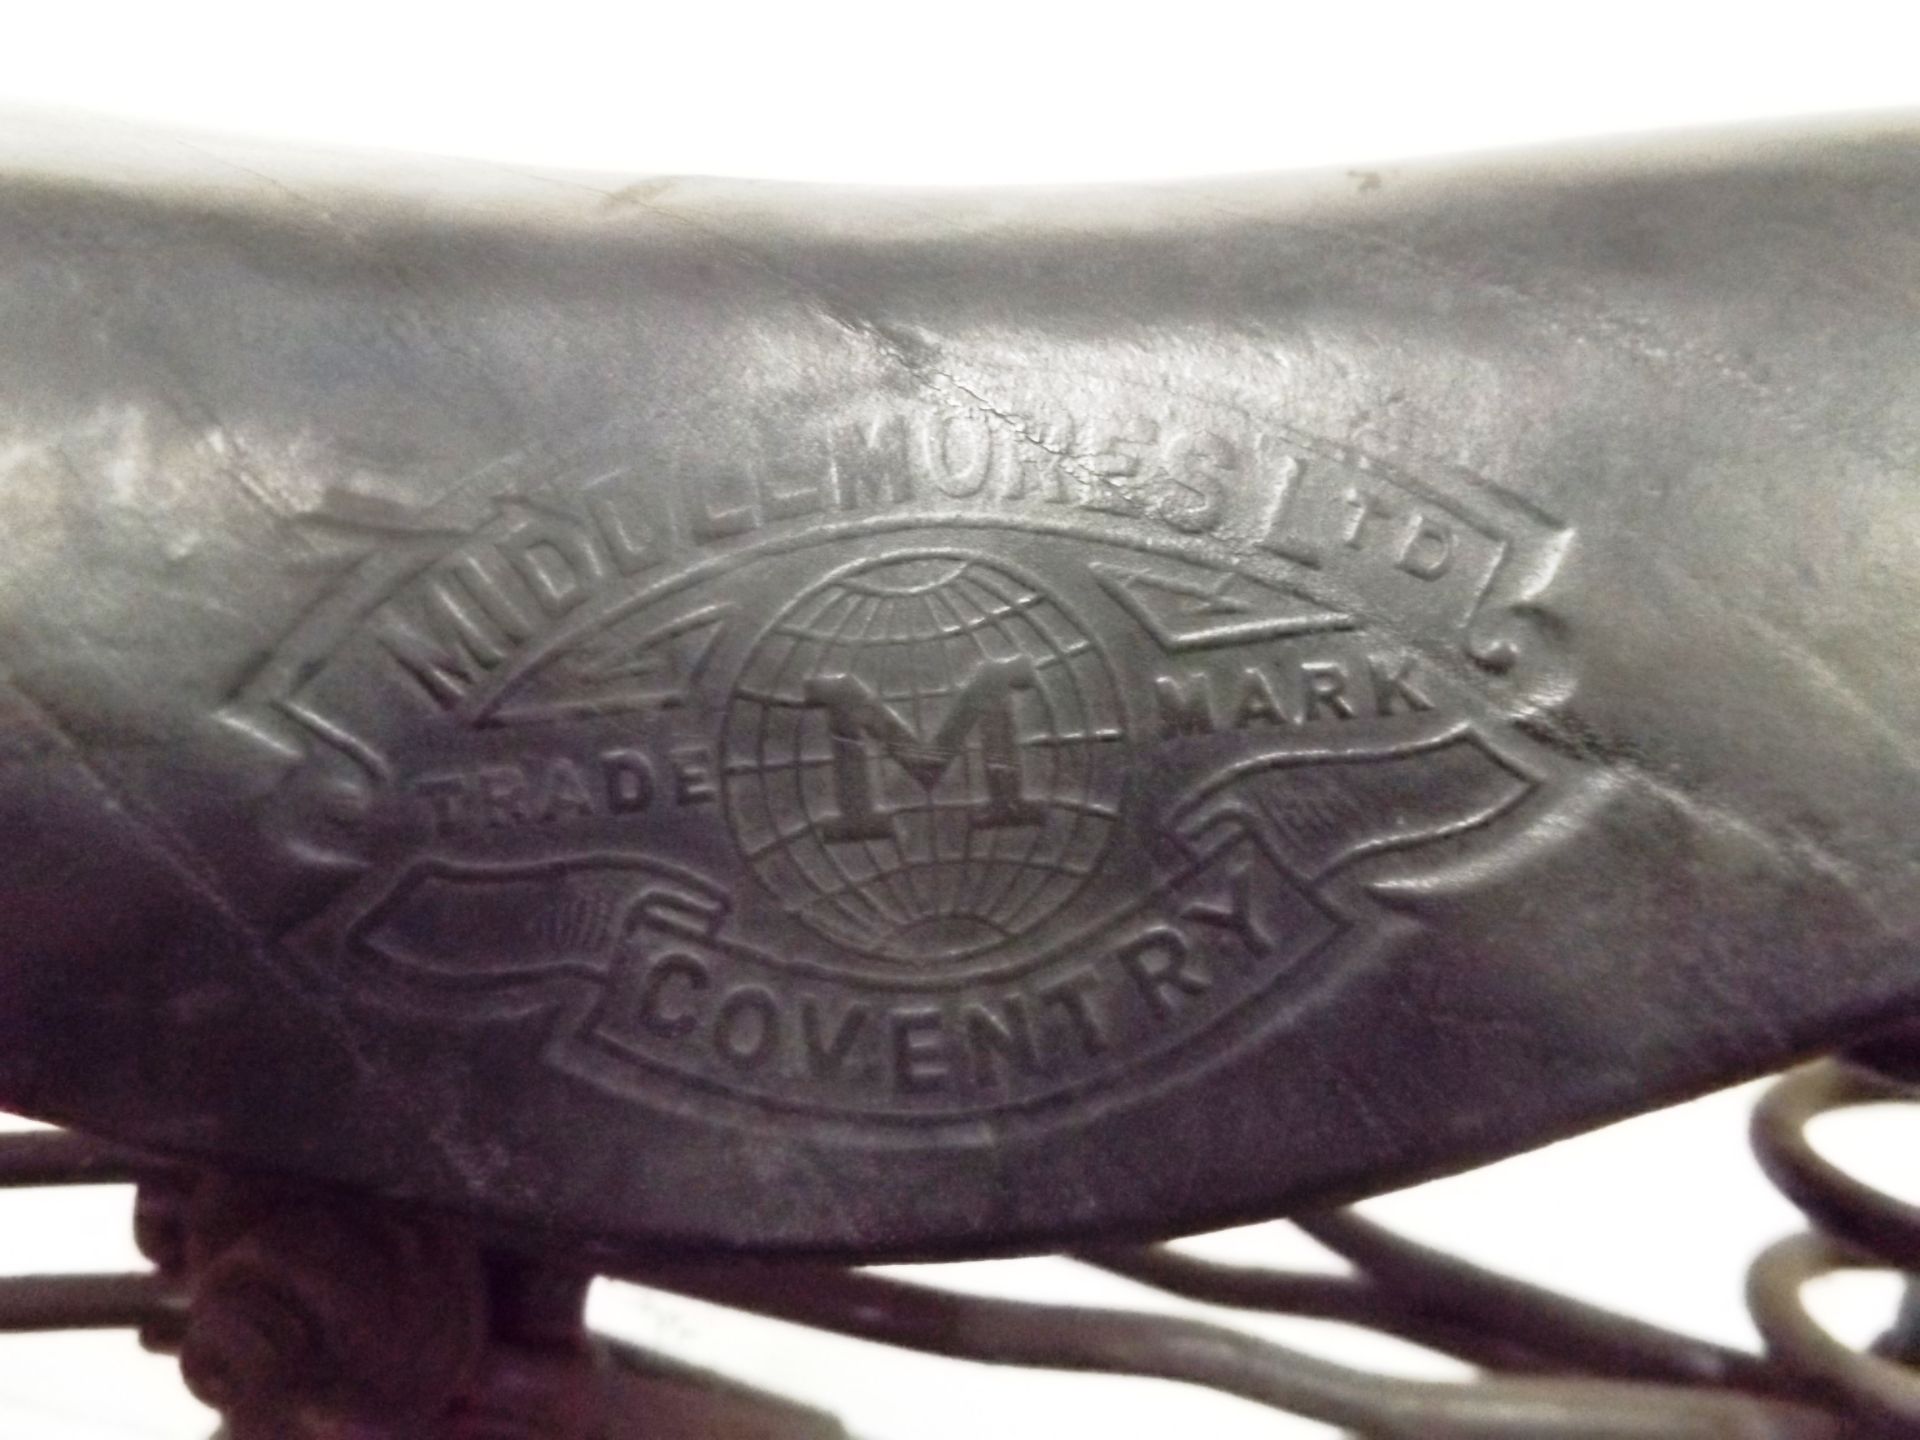 Phillips Mk V* Army Bicycle - Extremely Rare and Collectable - Image 10 of 11